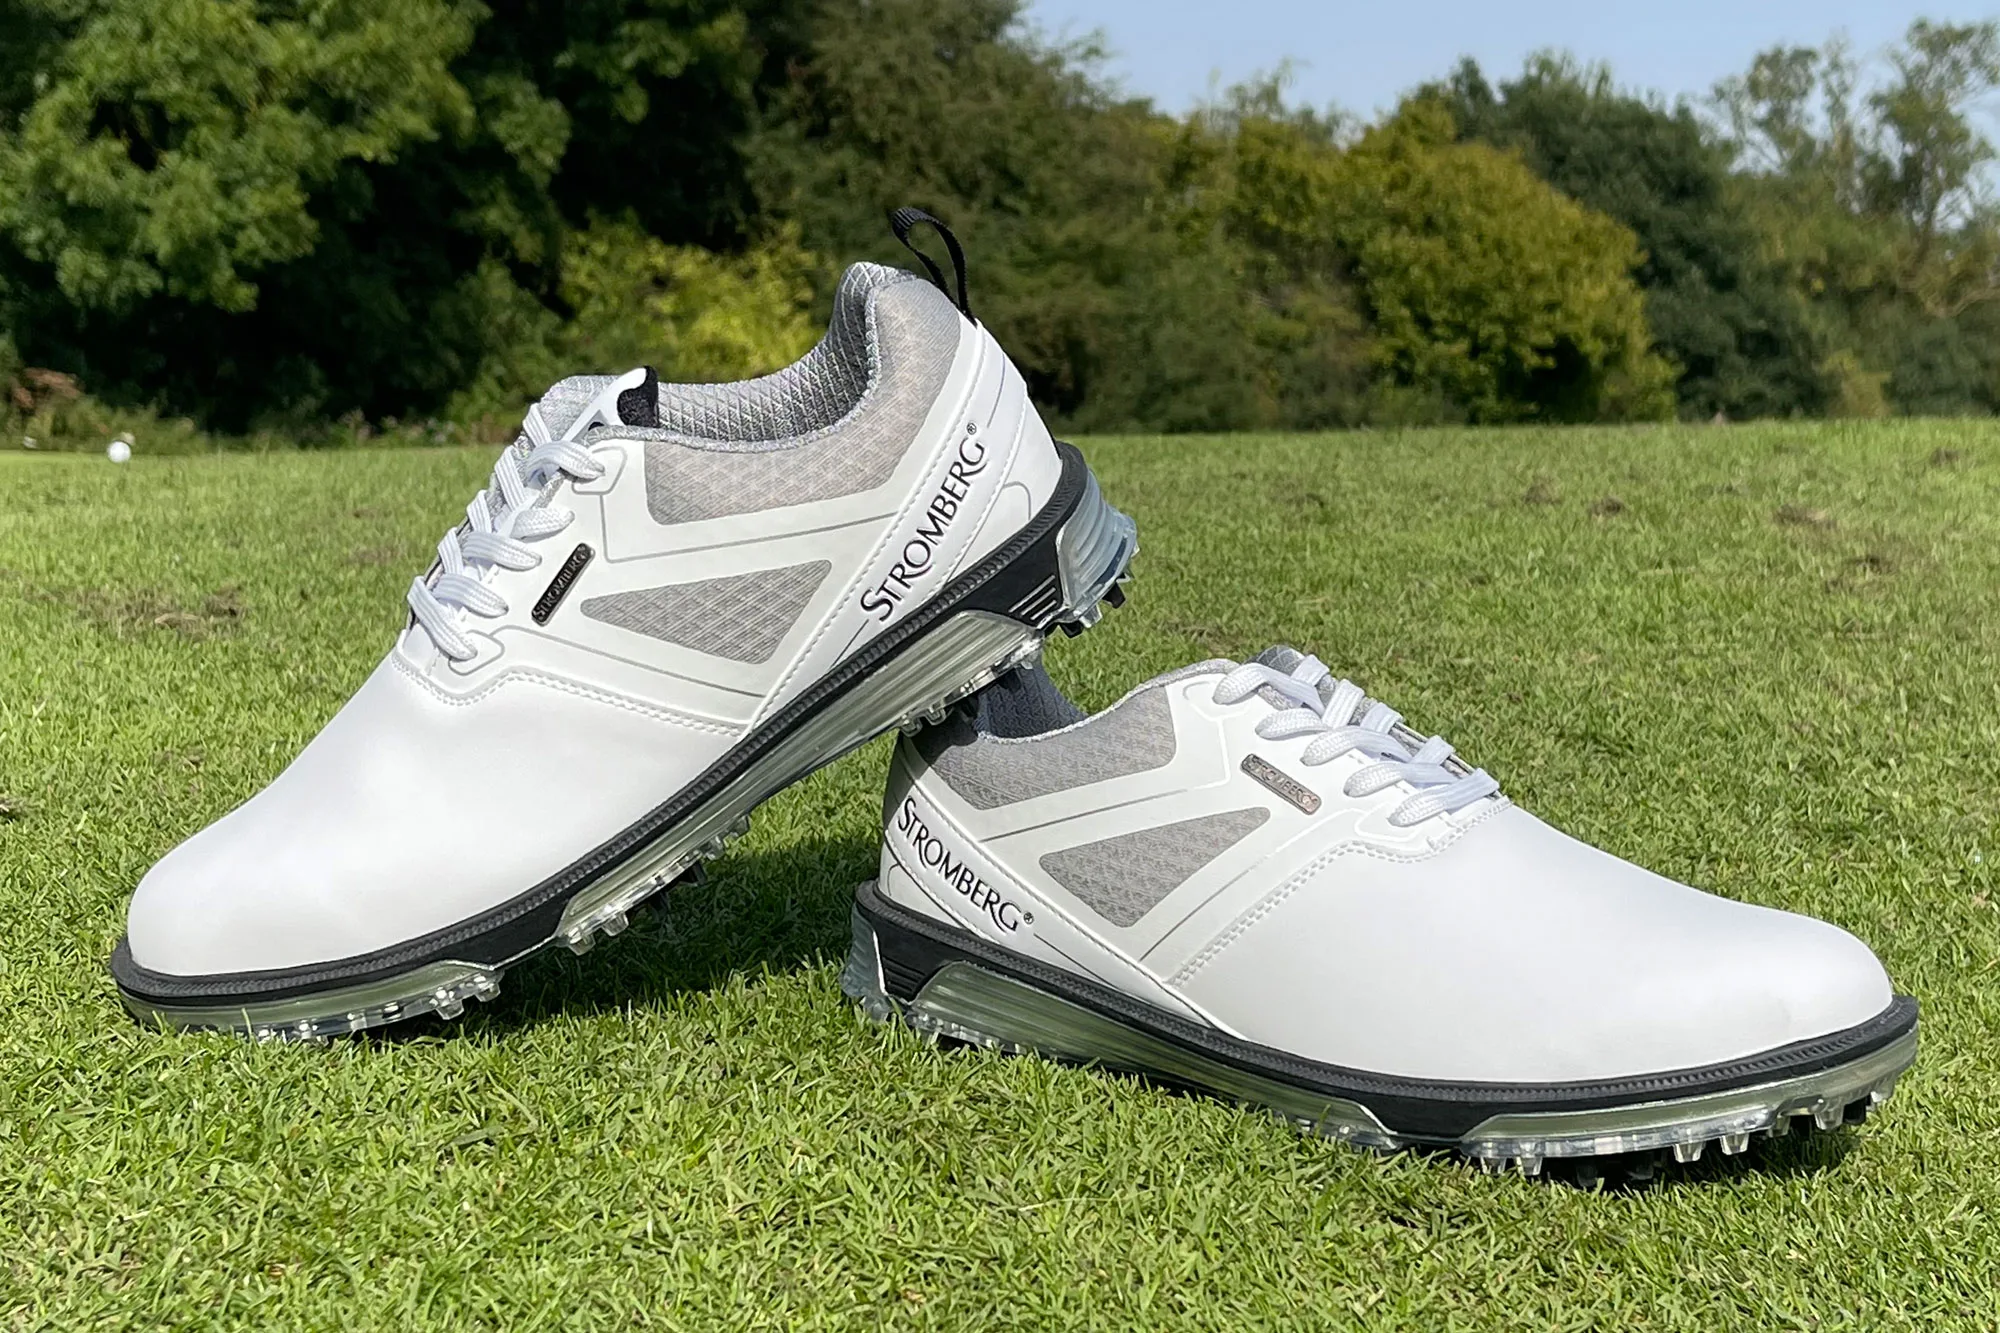 Stromberg Men's Tour Classic Waterproof Spiked Golf Shoes Review